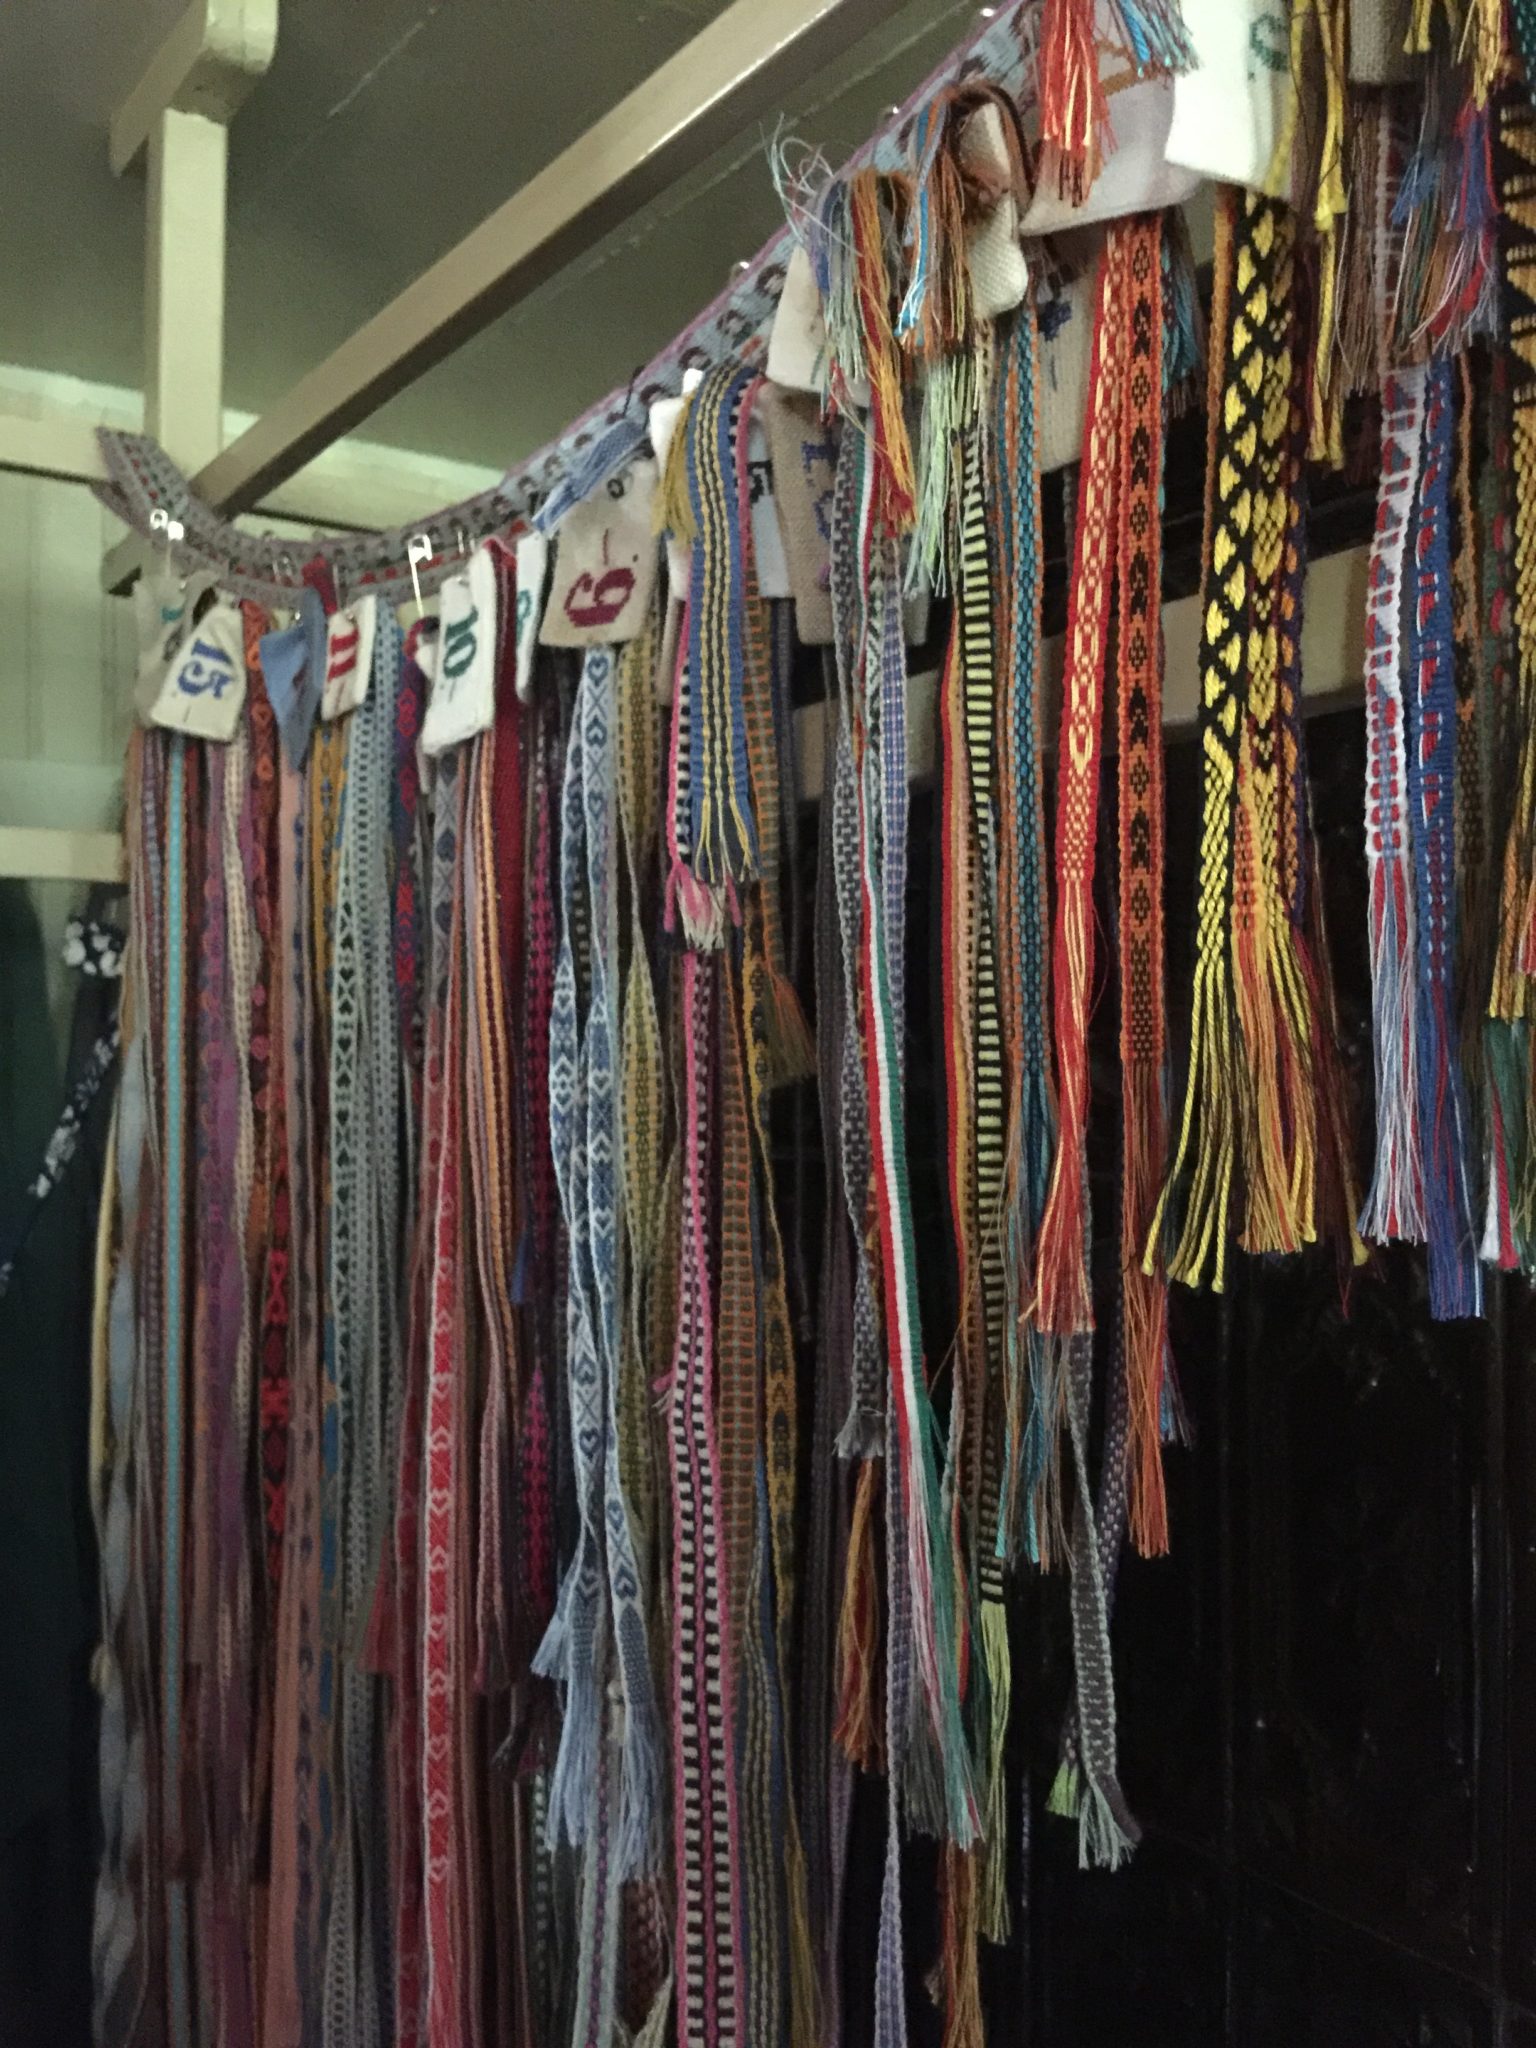 Incredibly detailed ribbons, woven by local craftspeople. 